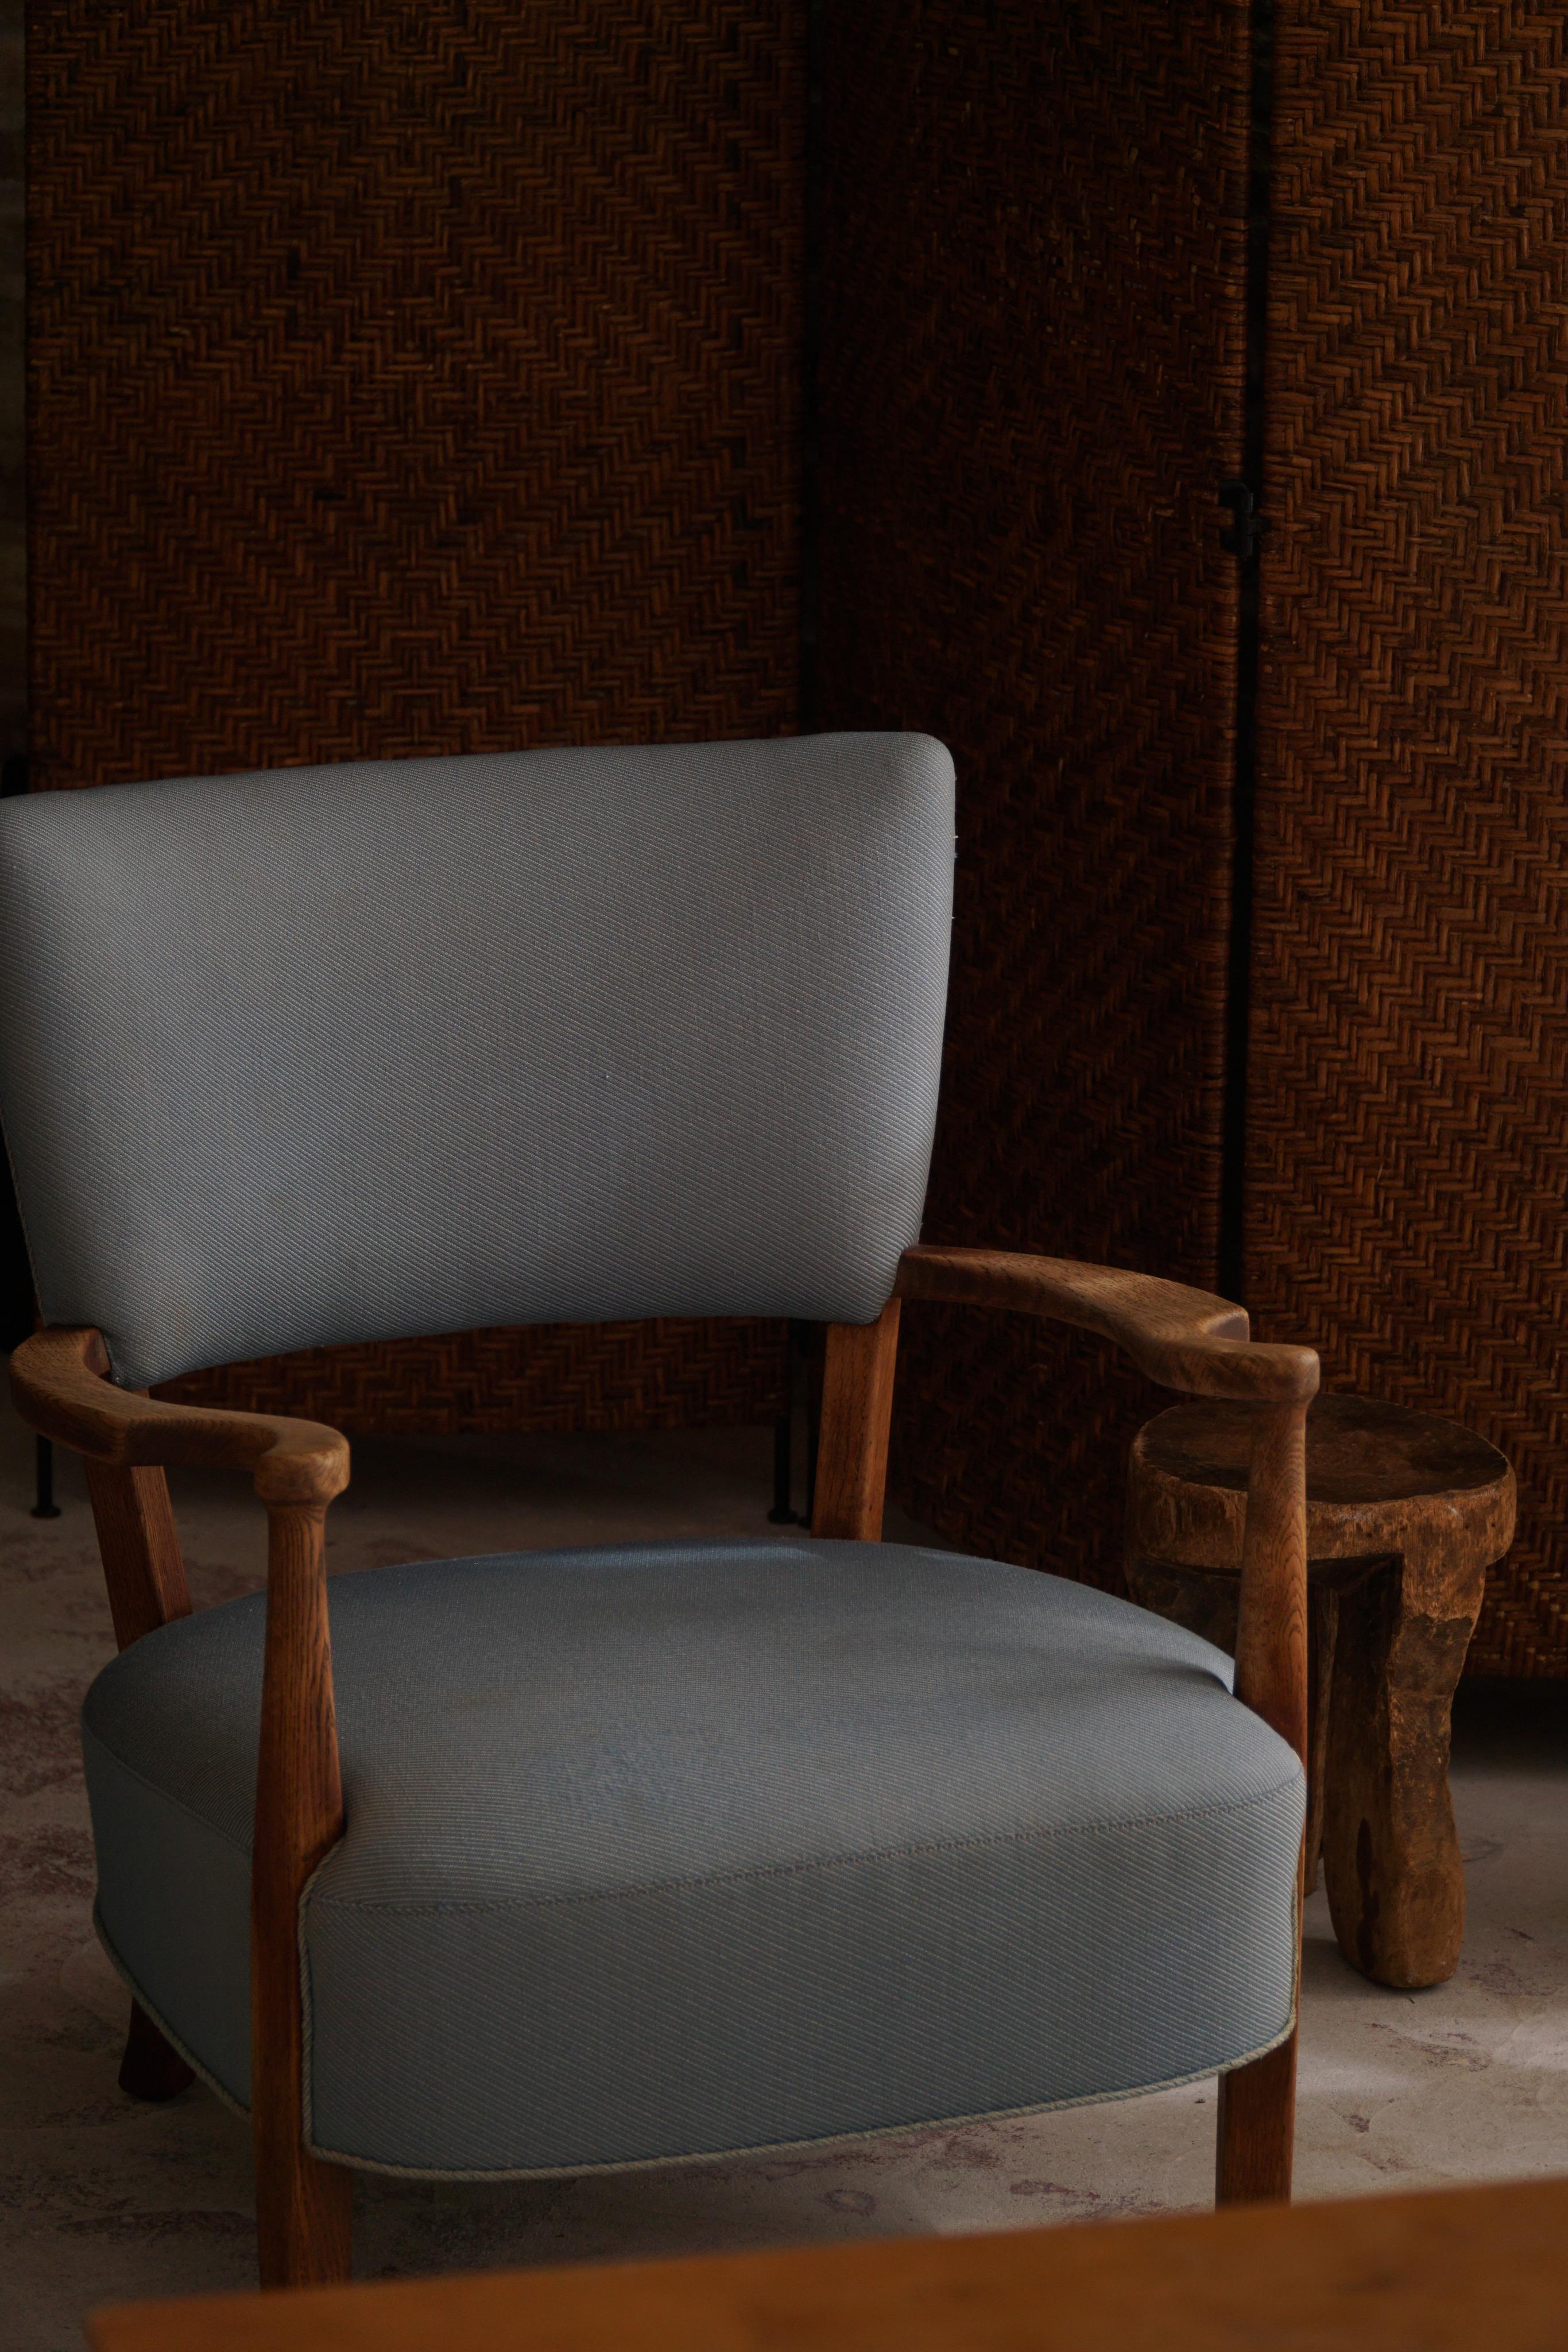 Danish Modern, Curved Lounge Chair in Oak, Attributed to Viggo Boesen, 1950s For Sale 11